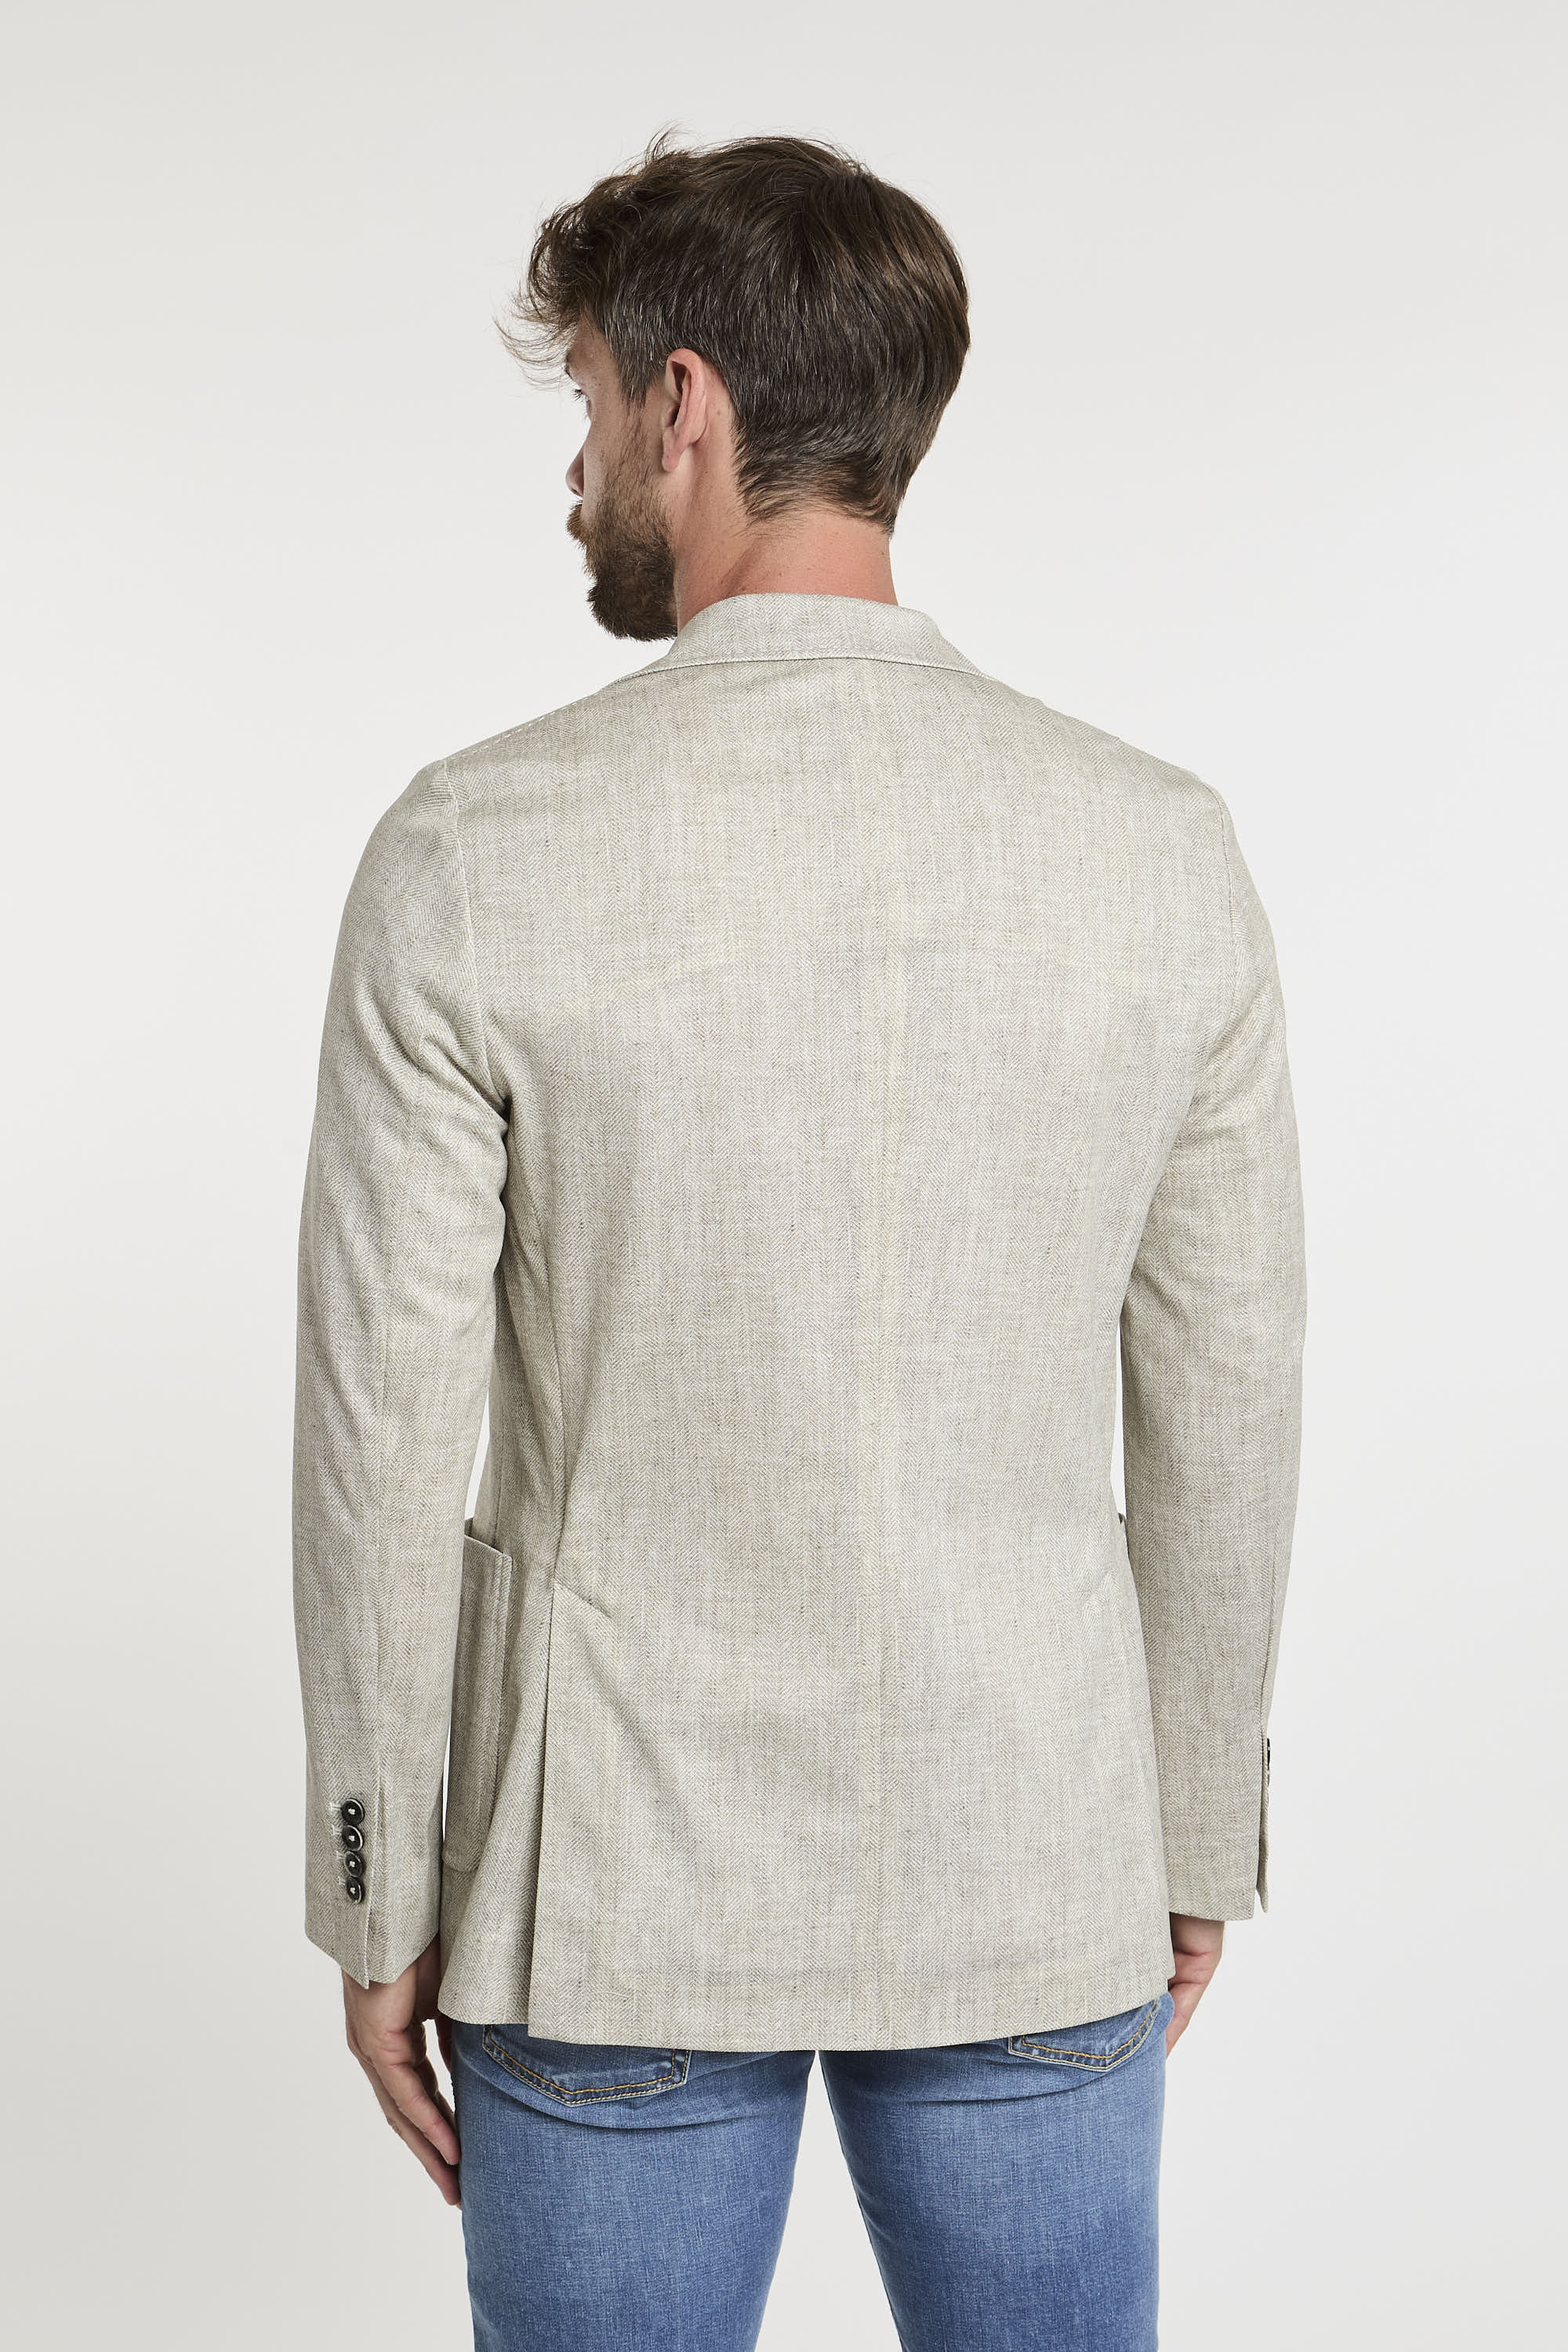 Circolo 1901 Cotton Jacket in Natural Beige-5